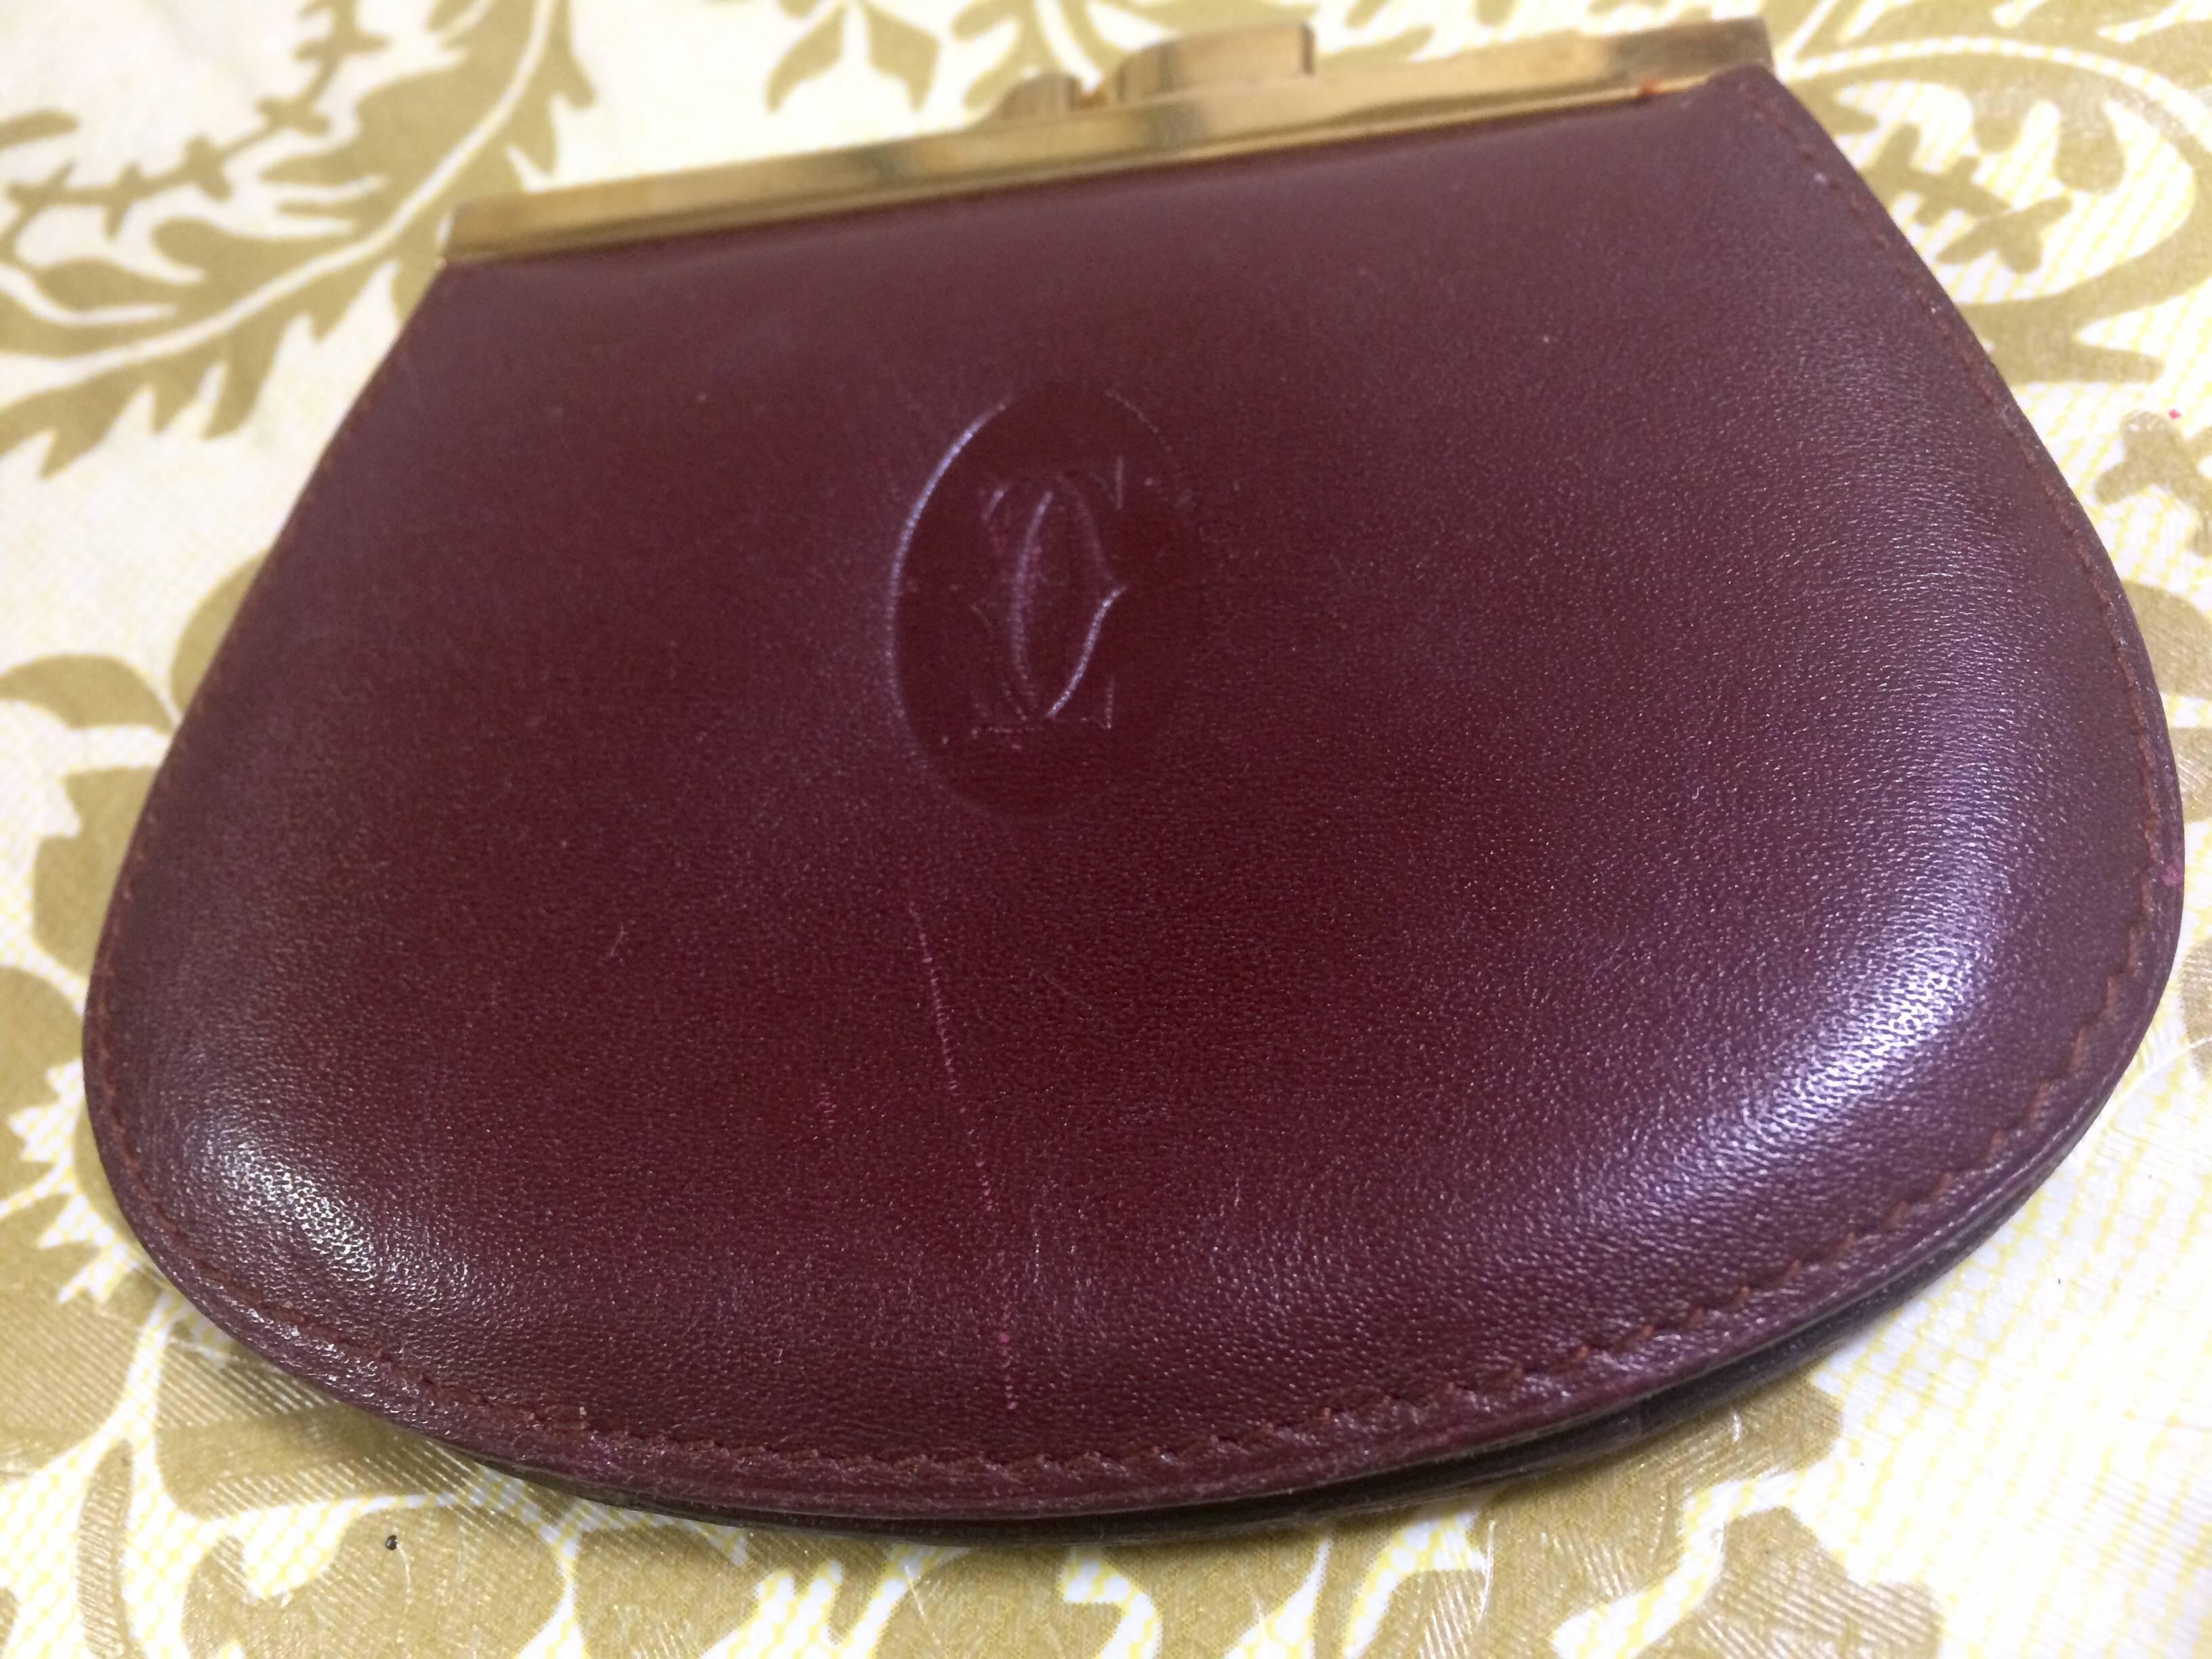 1990s.  Vintage Cartier genuine wine leather coin case wallet with gold tone kiss lock closure. must de Cartier. Unisex use.

This is a Cartier vintage coin case purse from the early 90's, must de Cartier collection. 
Classic leather coin wallet